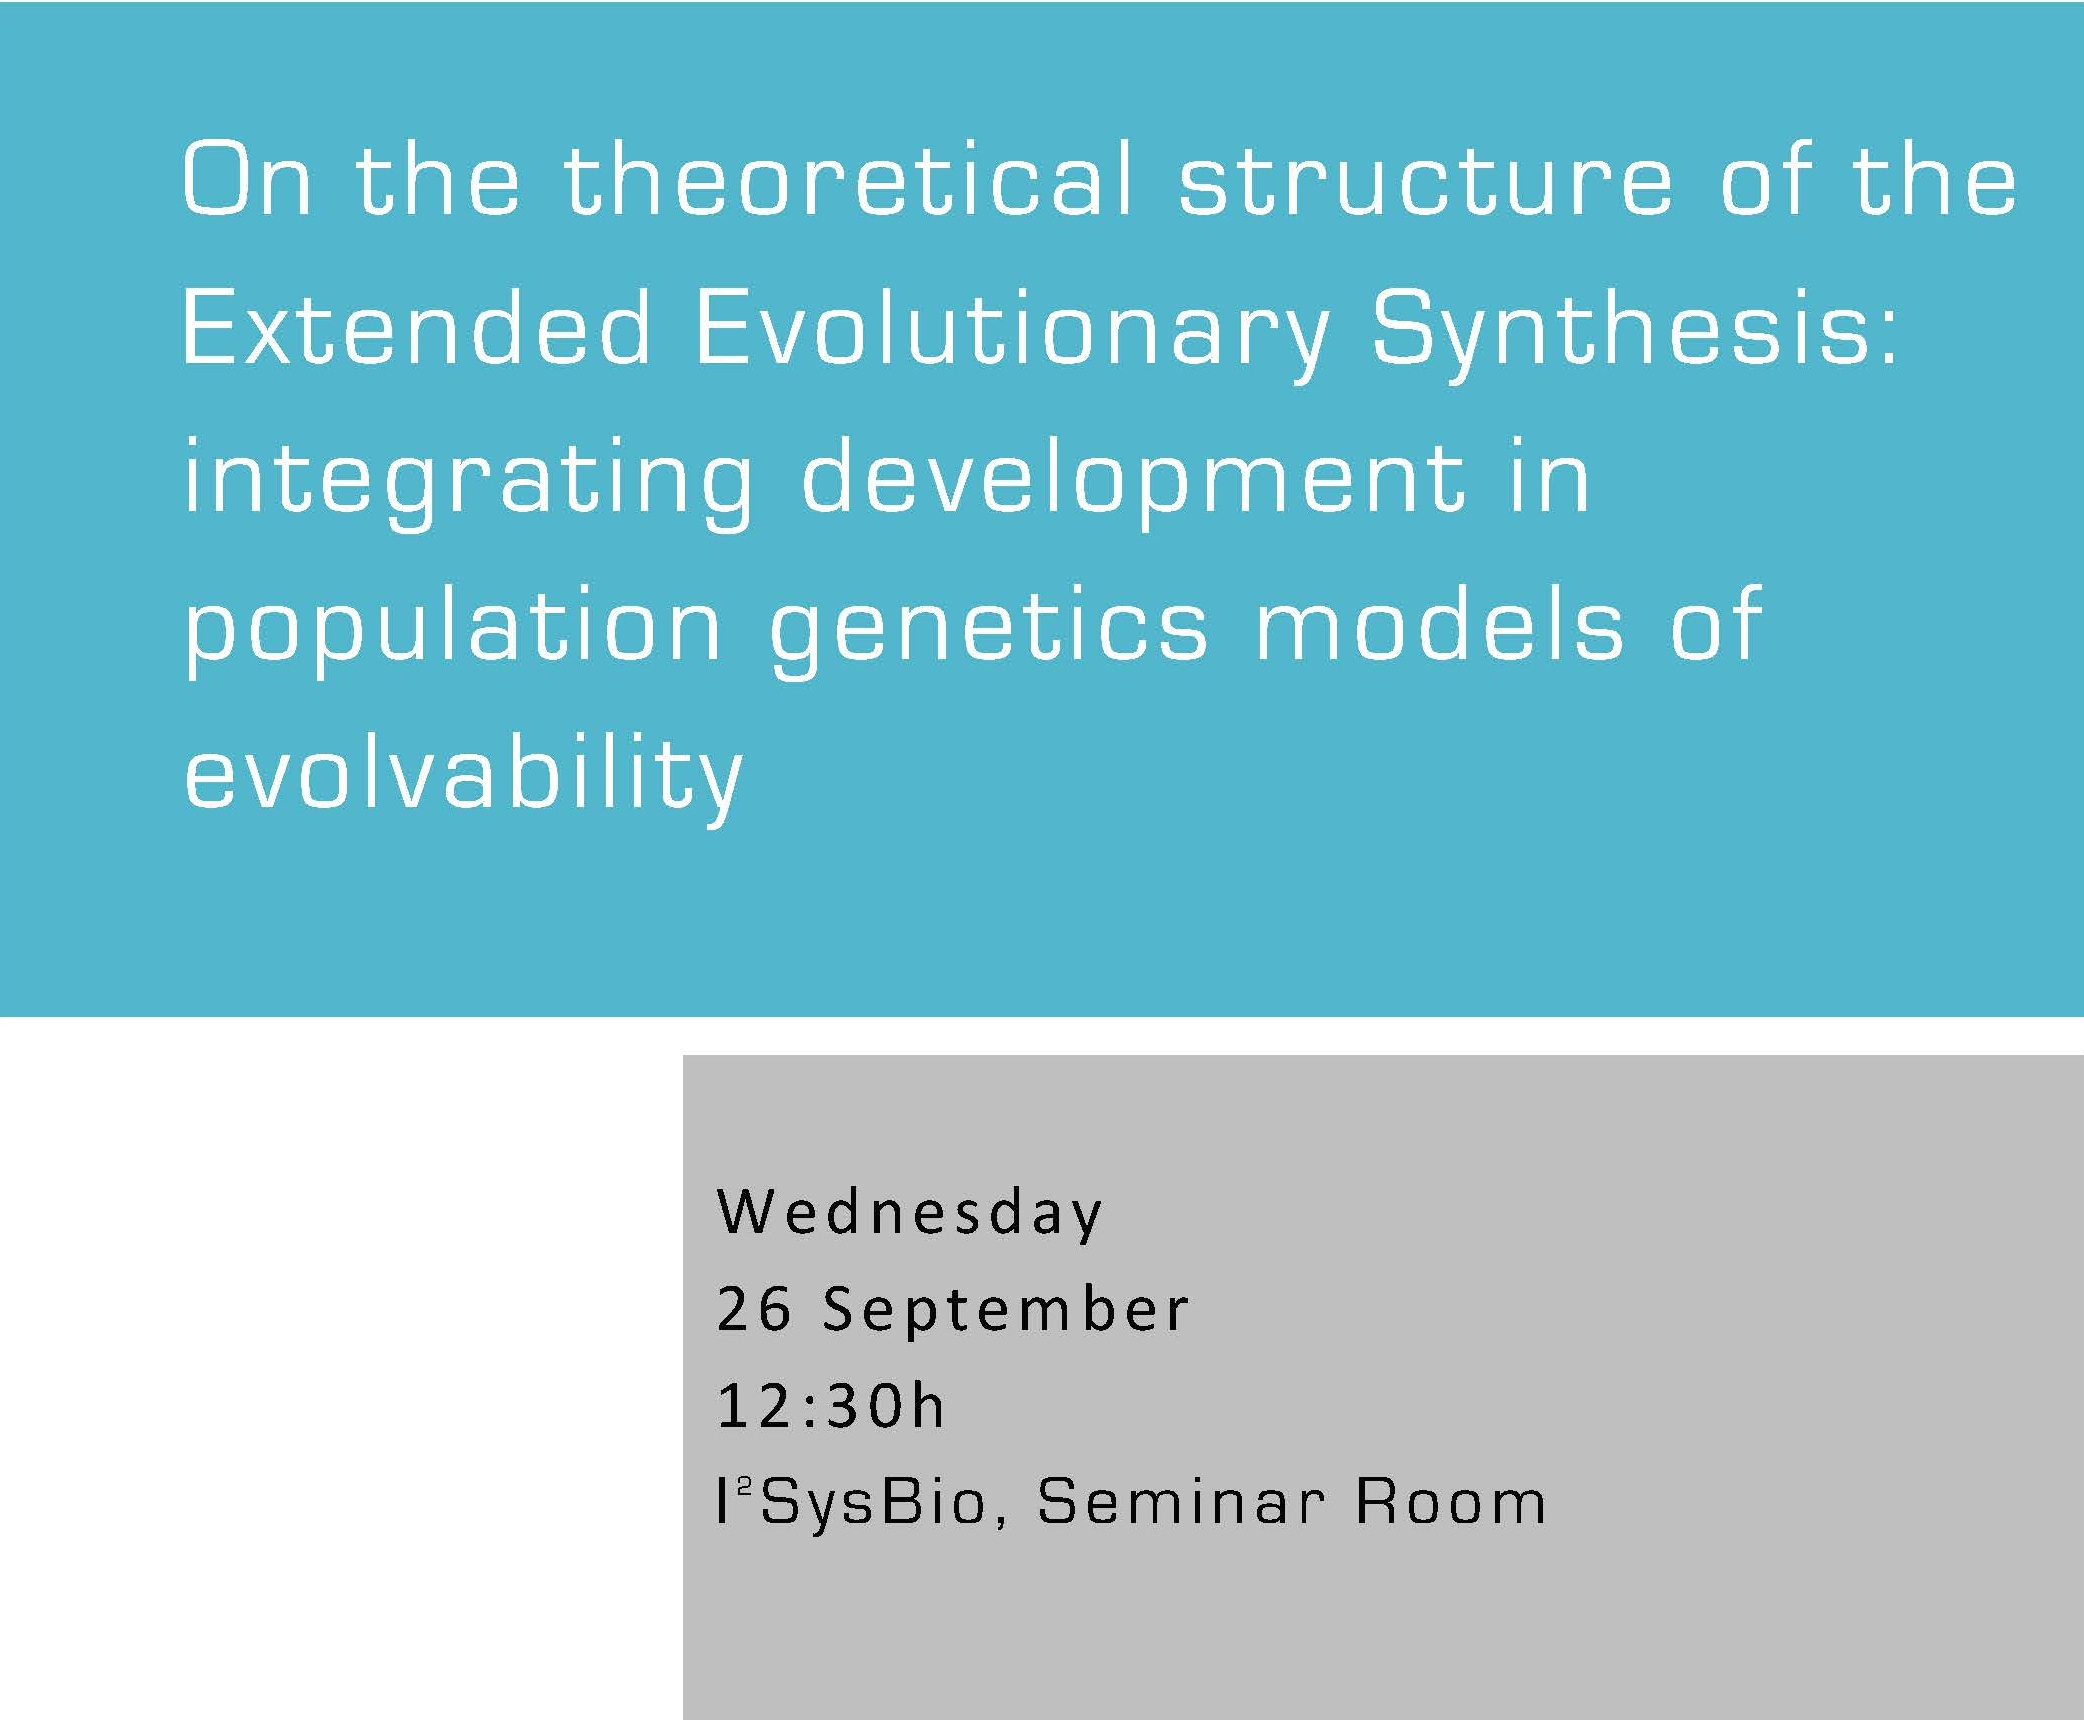 On the theoretical structure of the Extended Evolutionary Synthesis: integrating development in population genetics models of evolvability